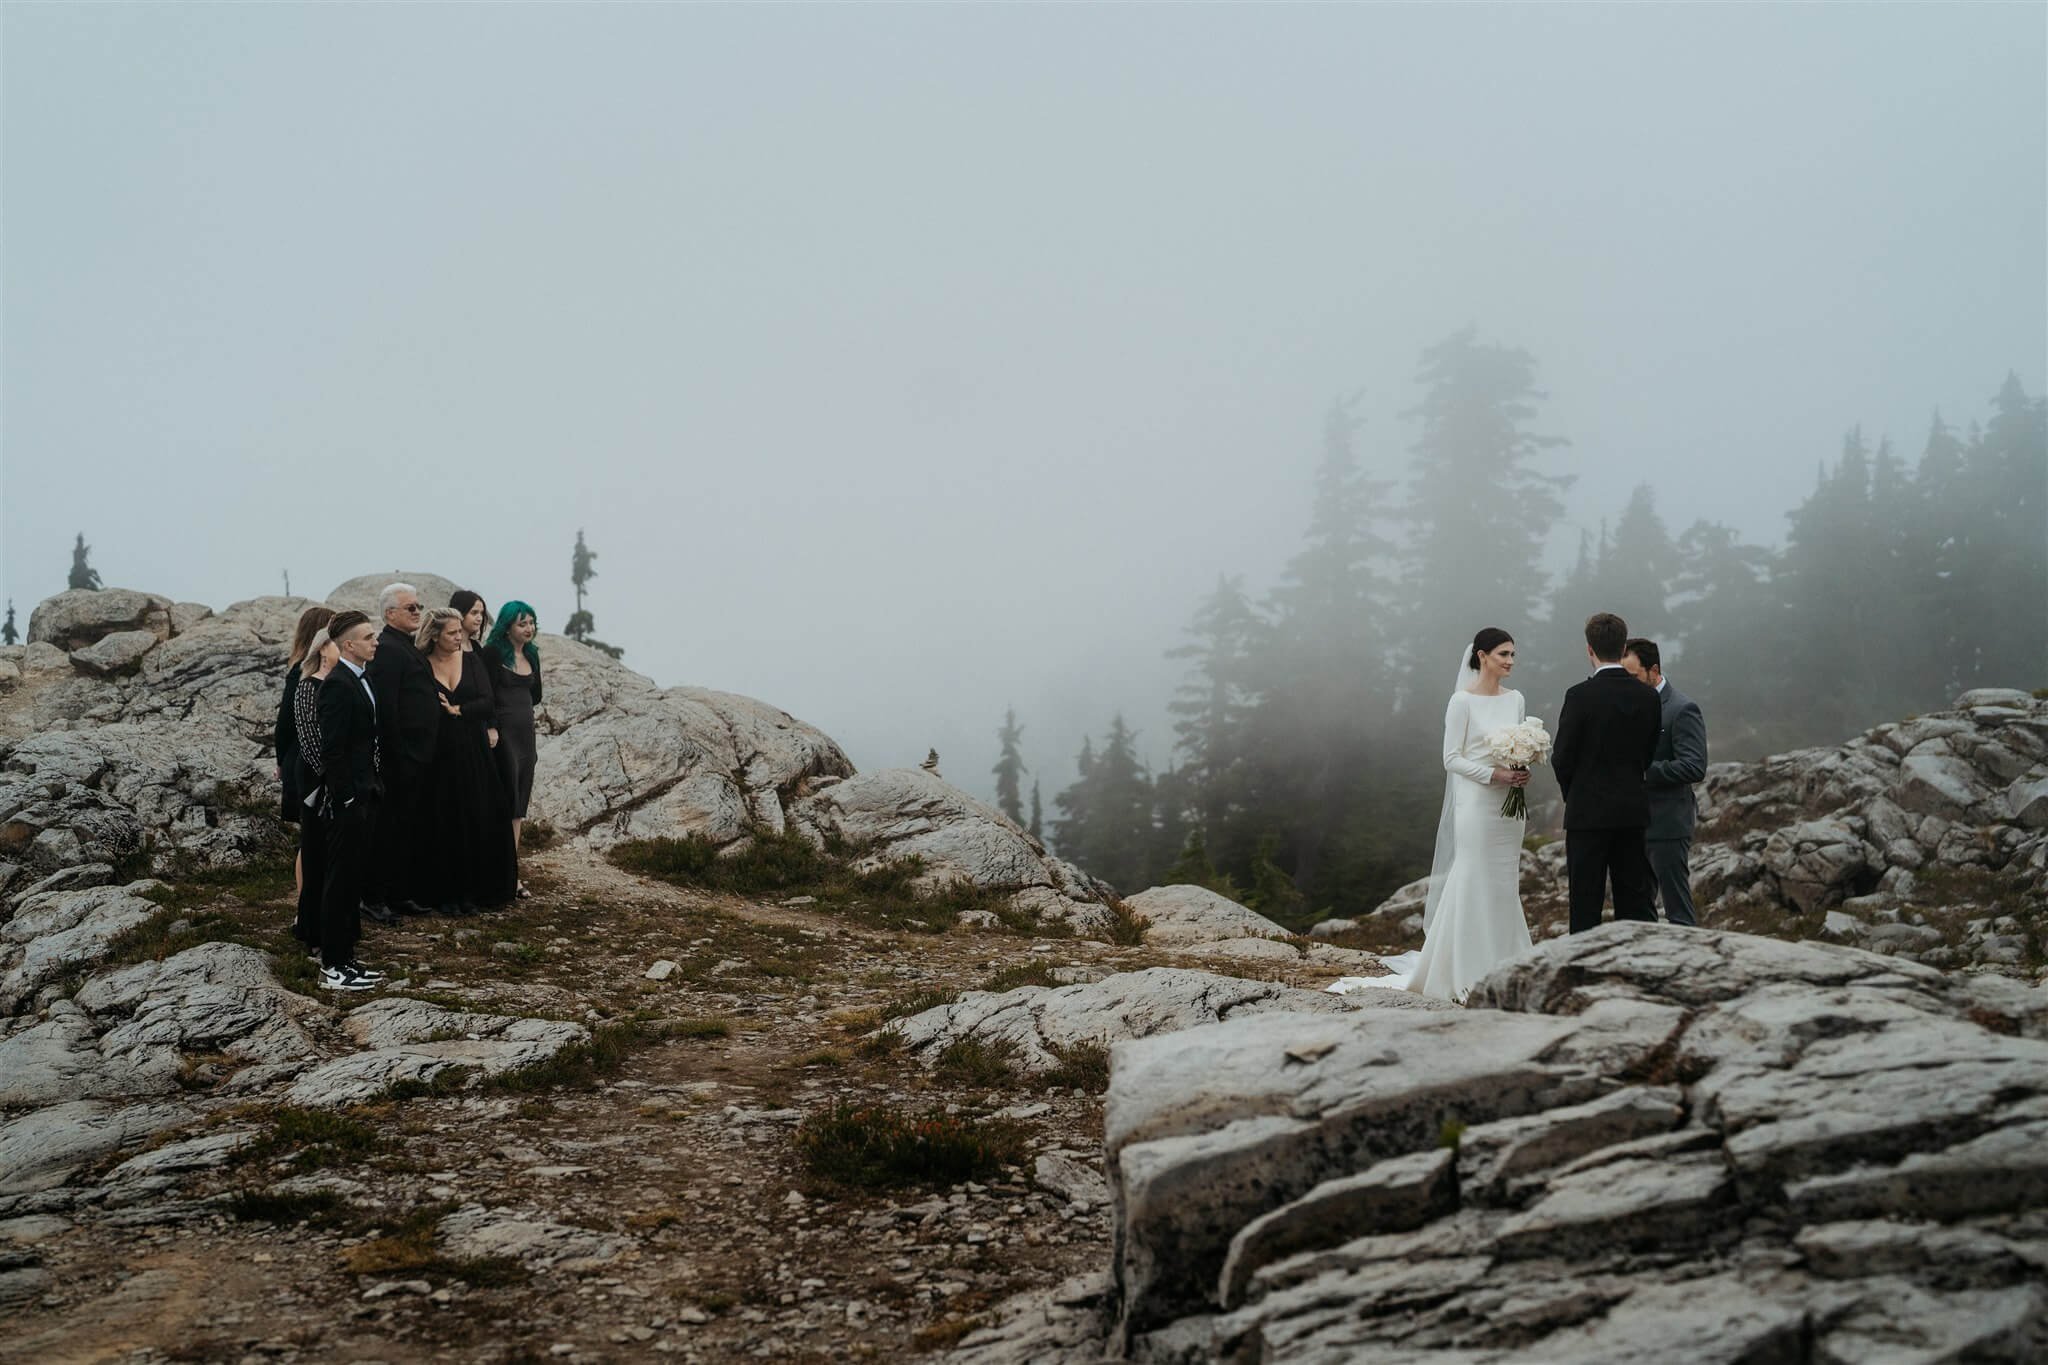 Bride and groom exchanging vows in the mountains at foggy Artist Point elopement while friends and family watch from a distance